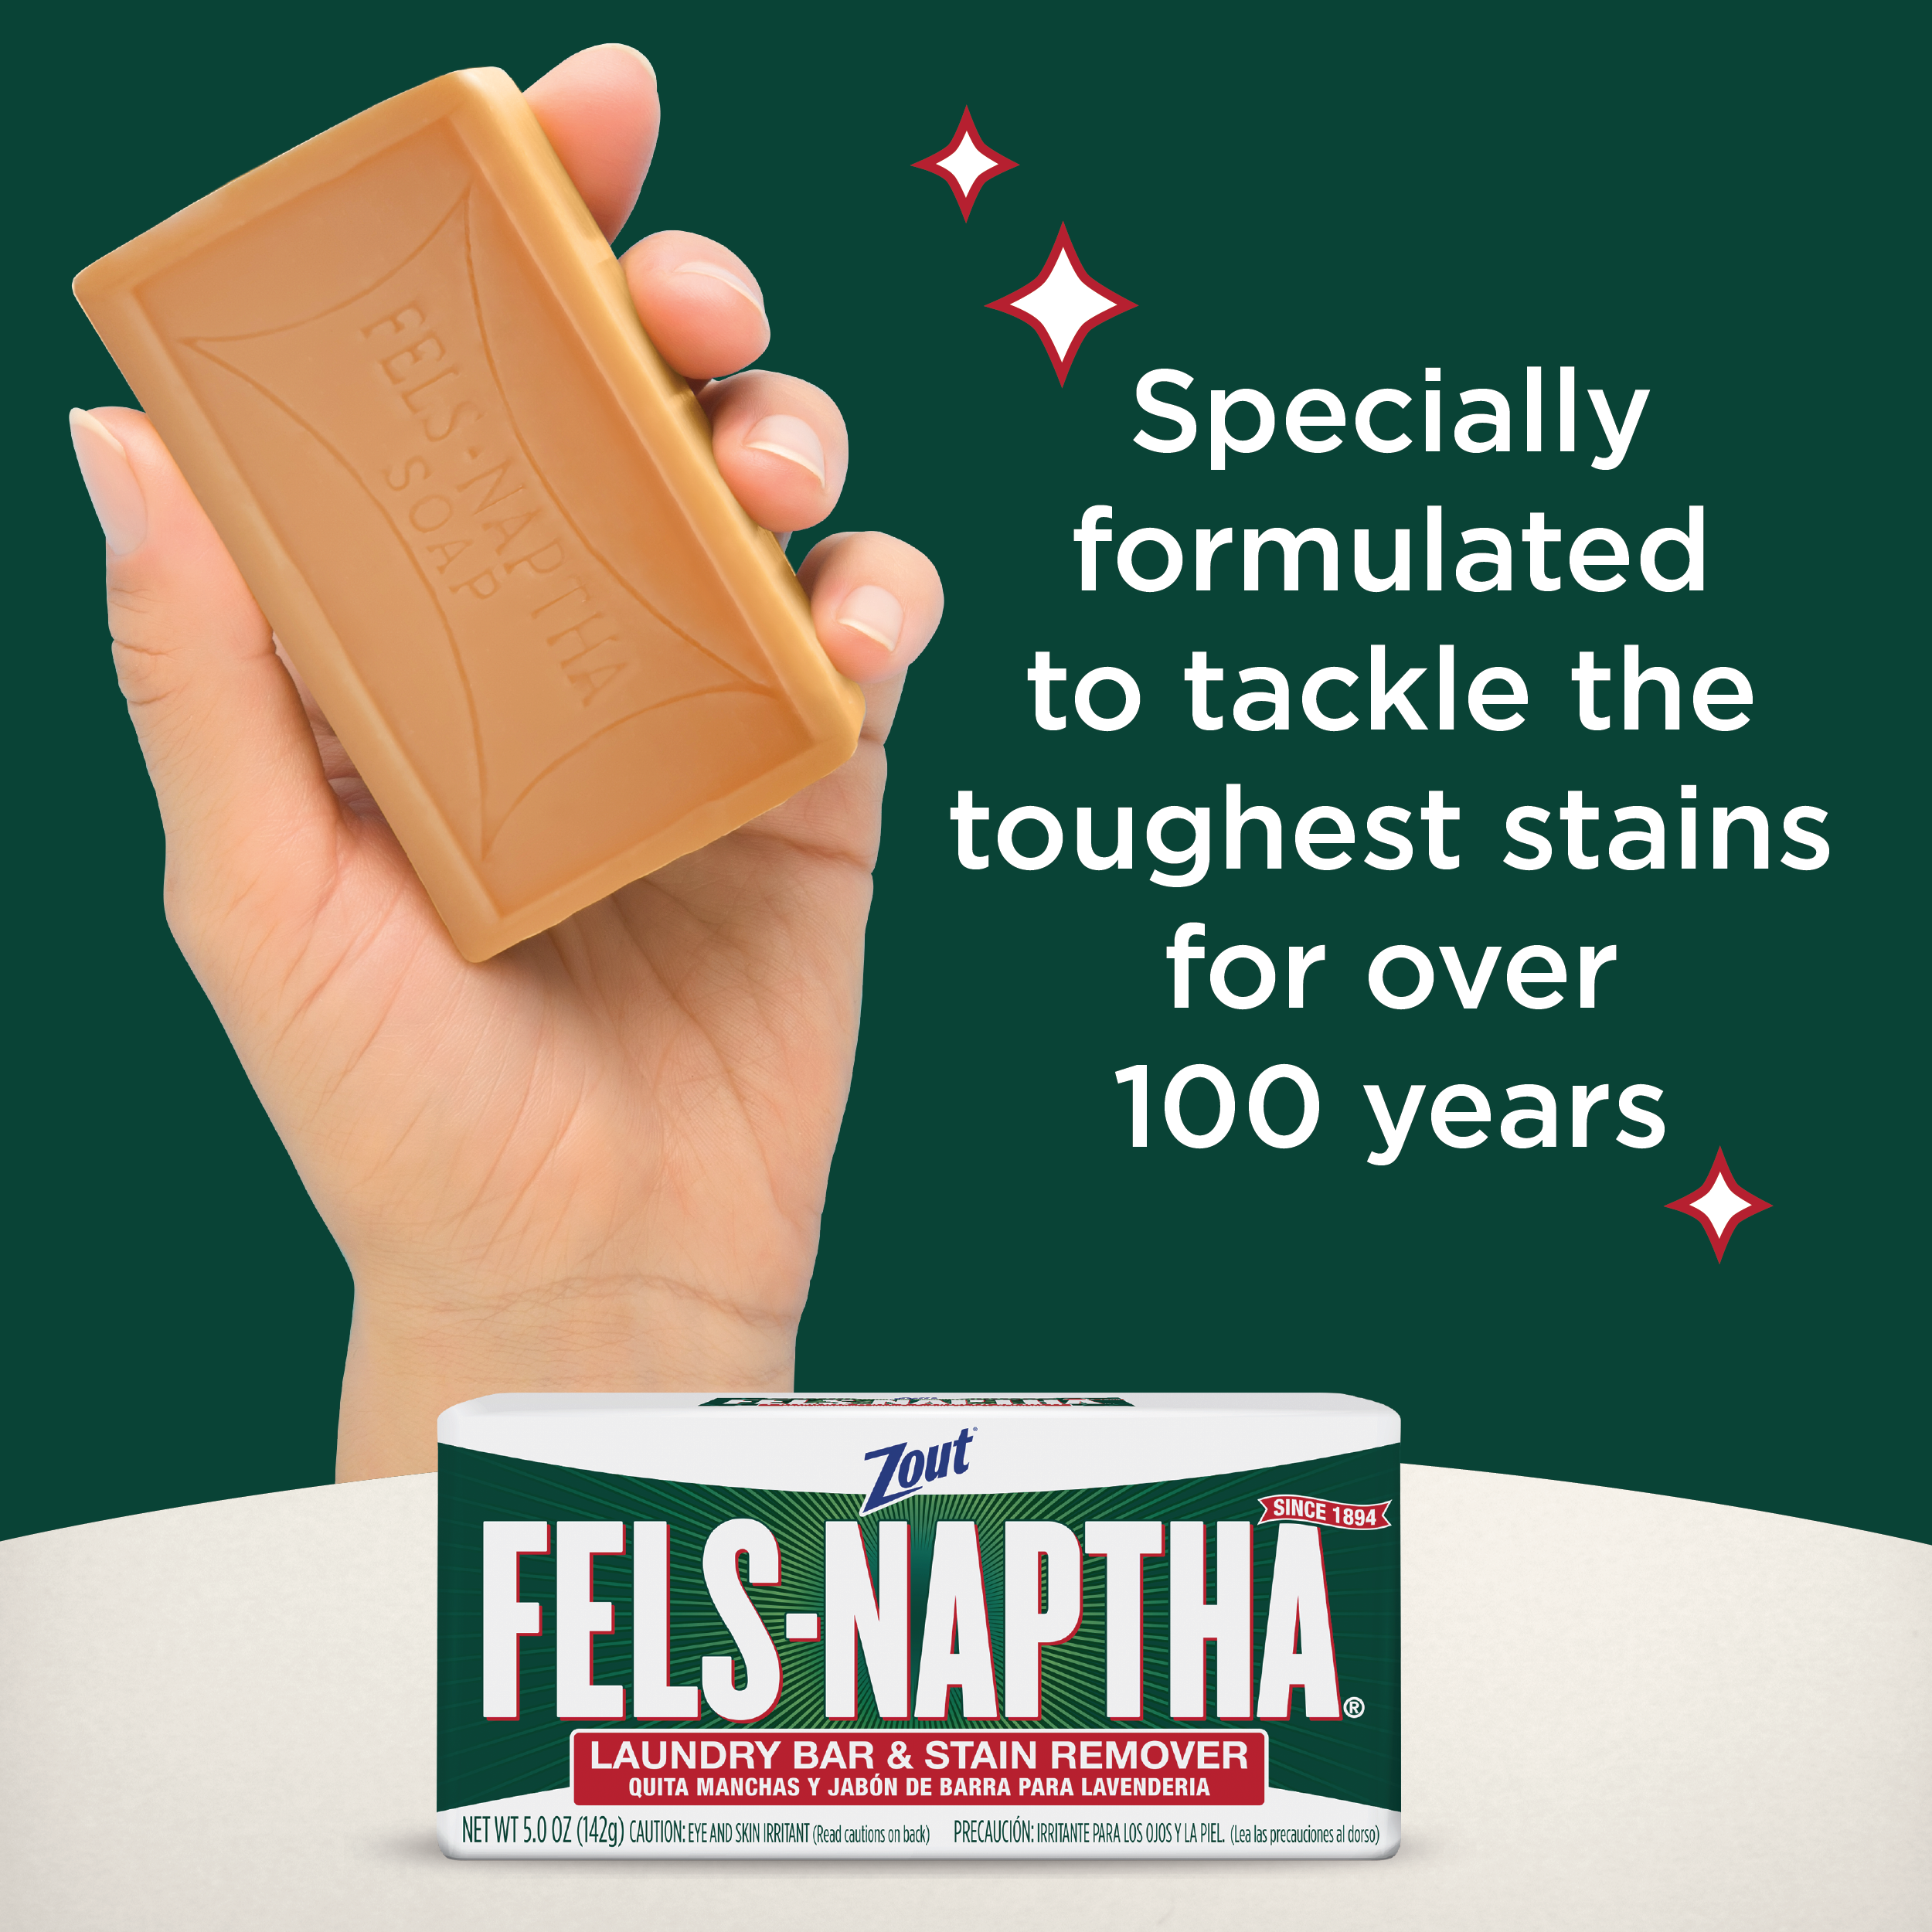 Zout Fels-Naptha Laundry Bar and Stain Remover, Tough Stain Removal, 5 oz., 1 Count - image 4 of 7